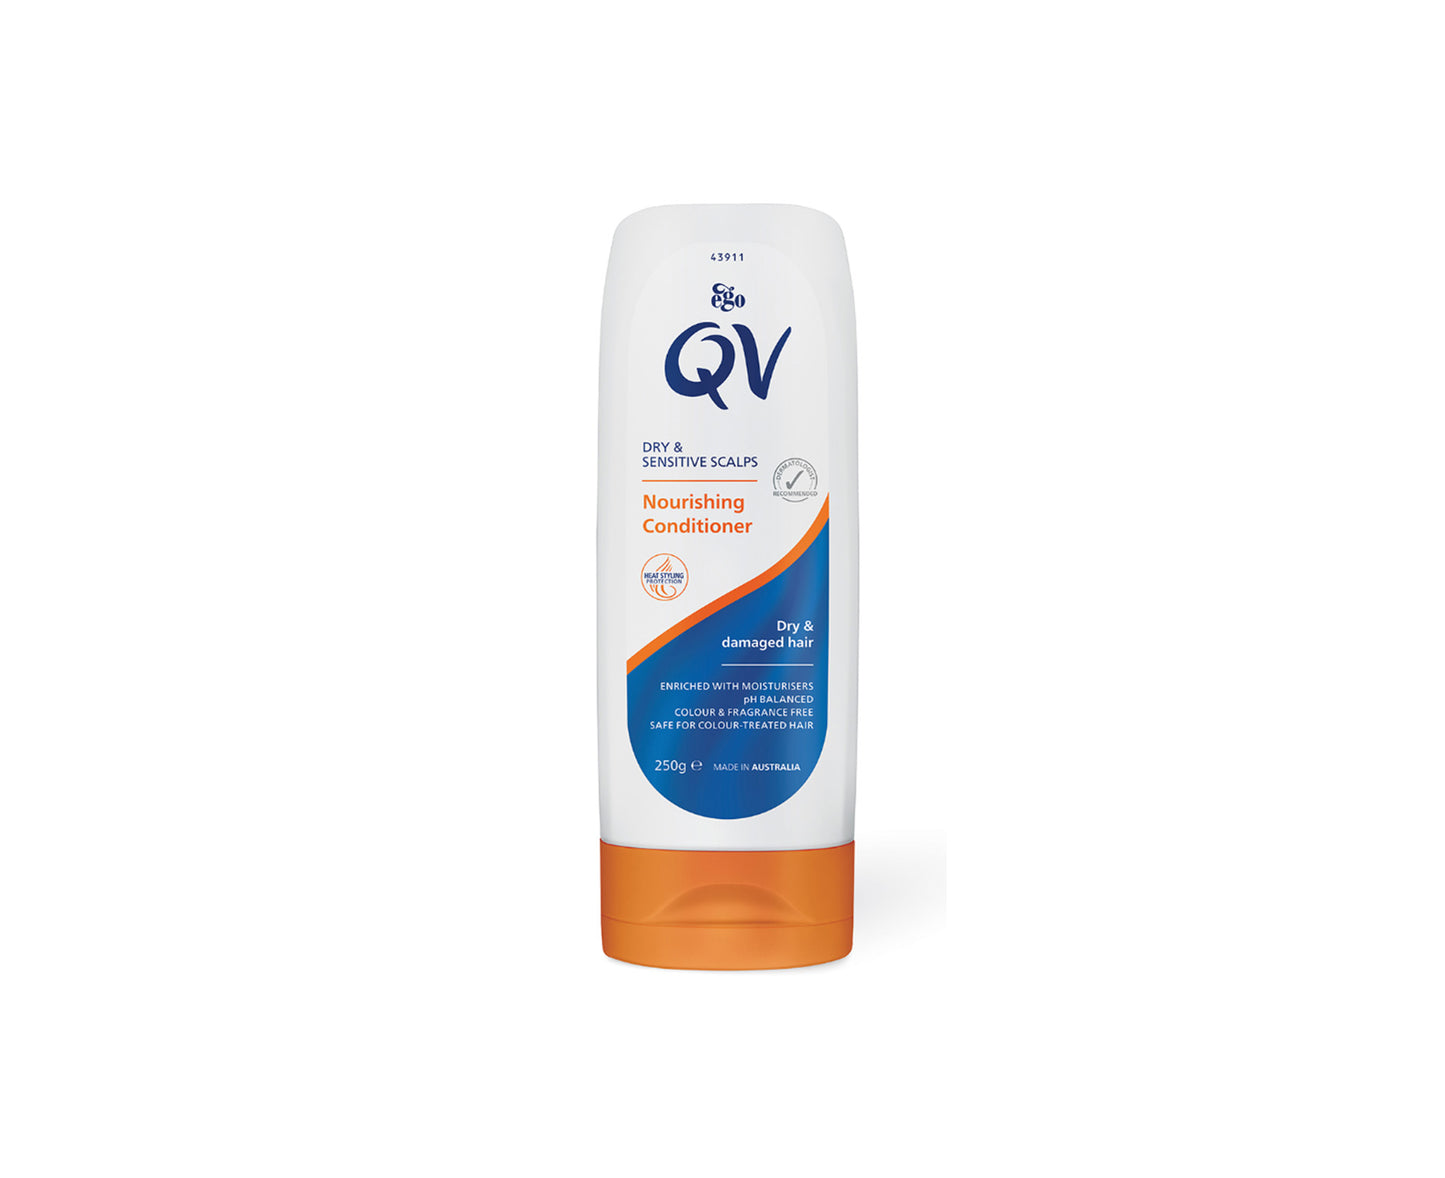 Ego QV Dry and Sensitive Scalps Nourishing Conditioner 250g